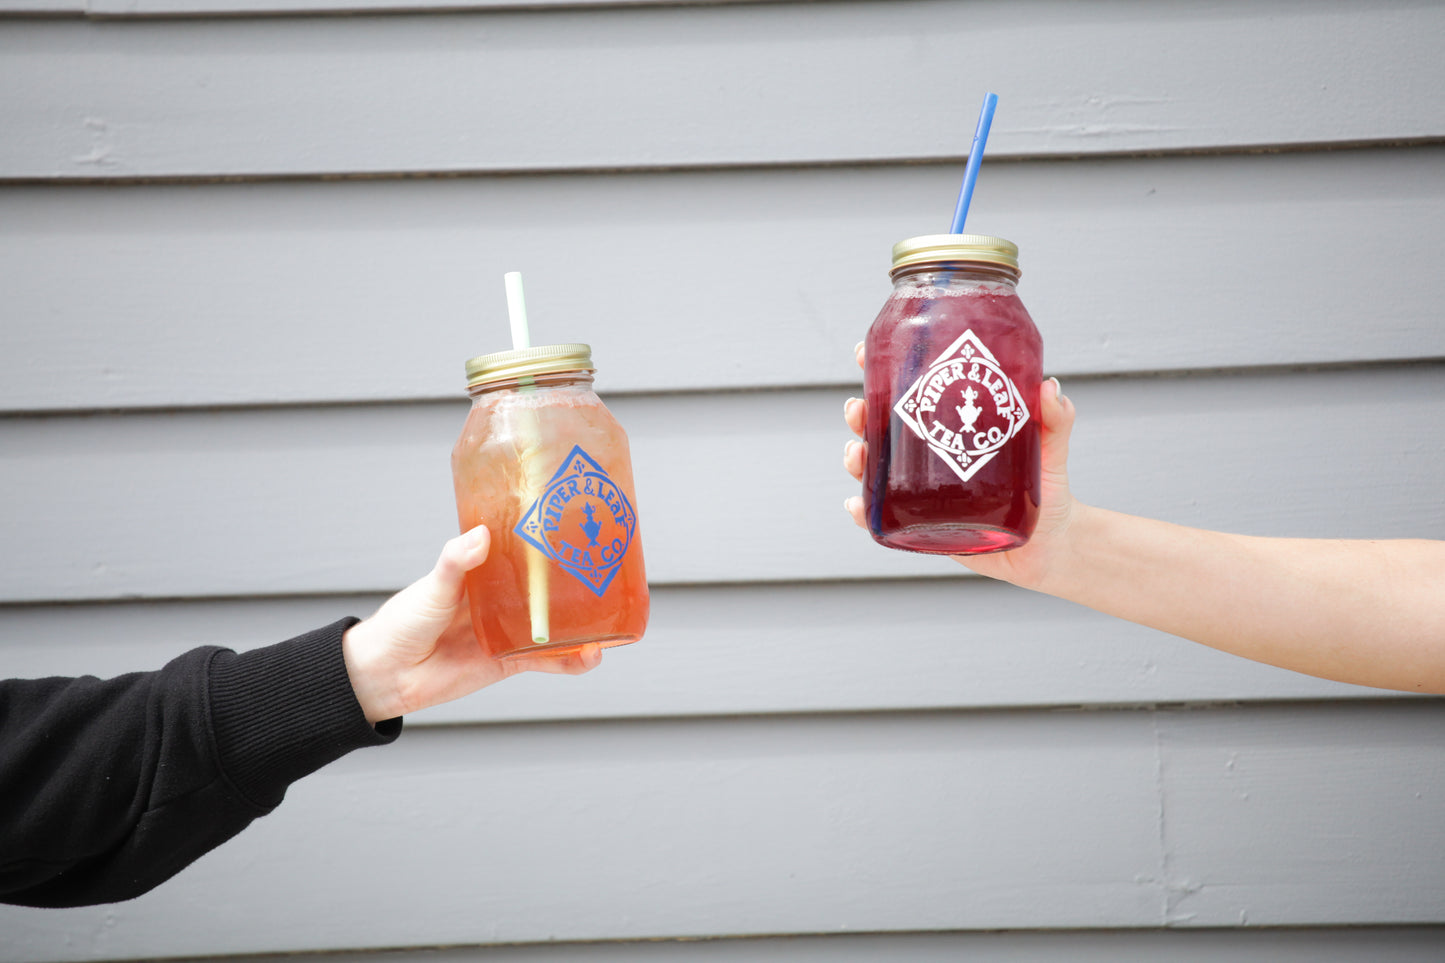 Two sustainable farmers holding up Signature Mason Drinking Jars - Quart Size filled with iced tea from Piper & Leaf Tea Co.